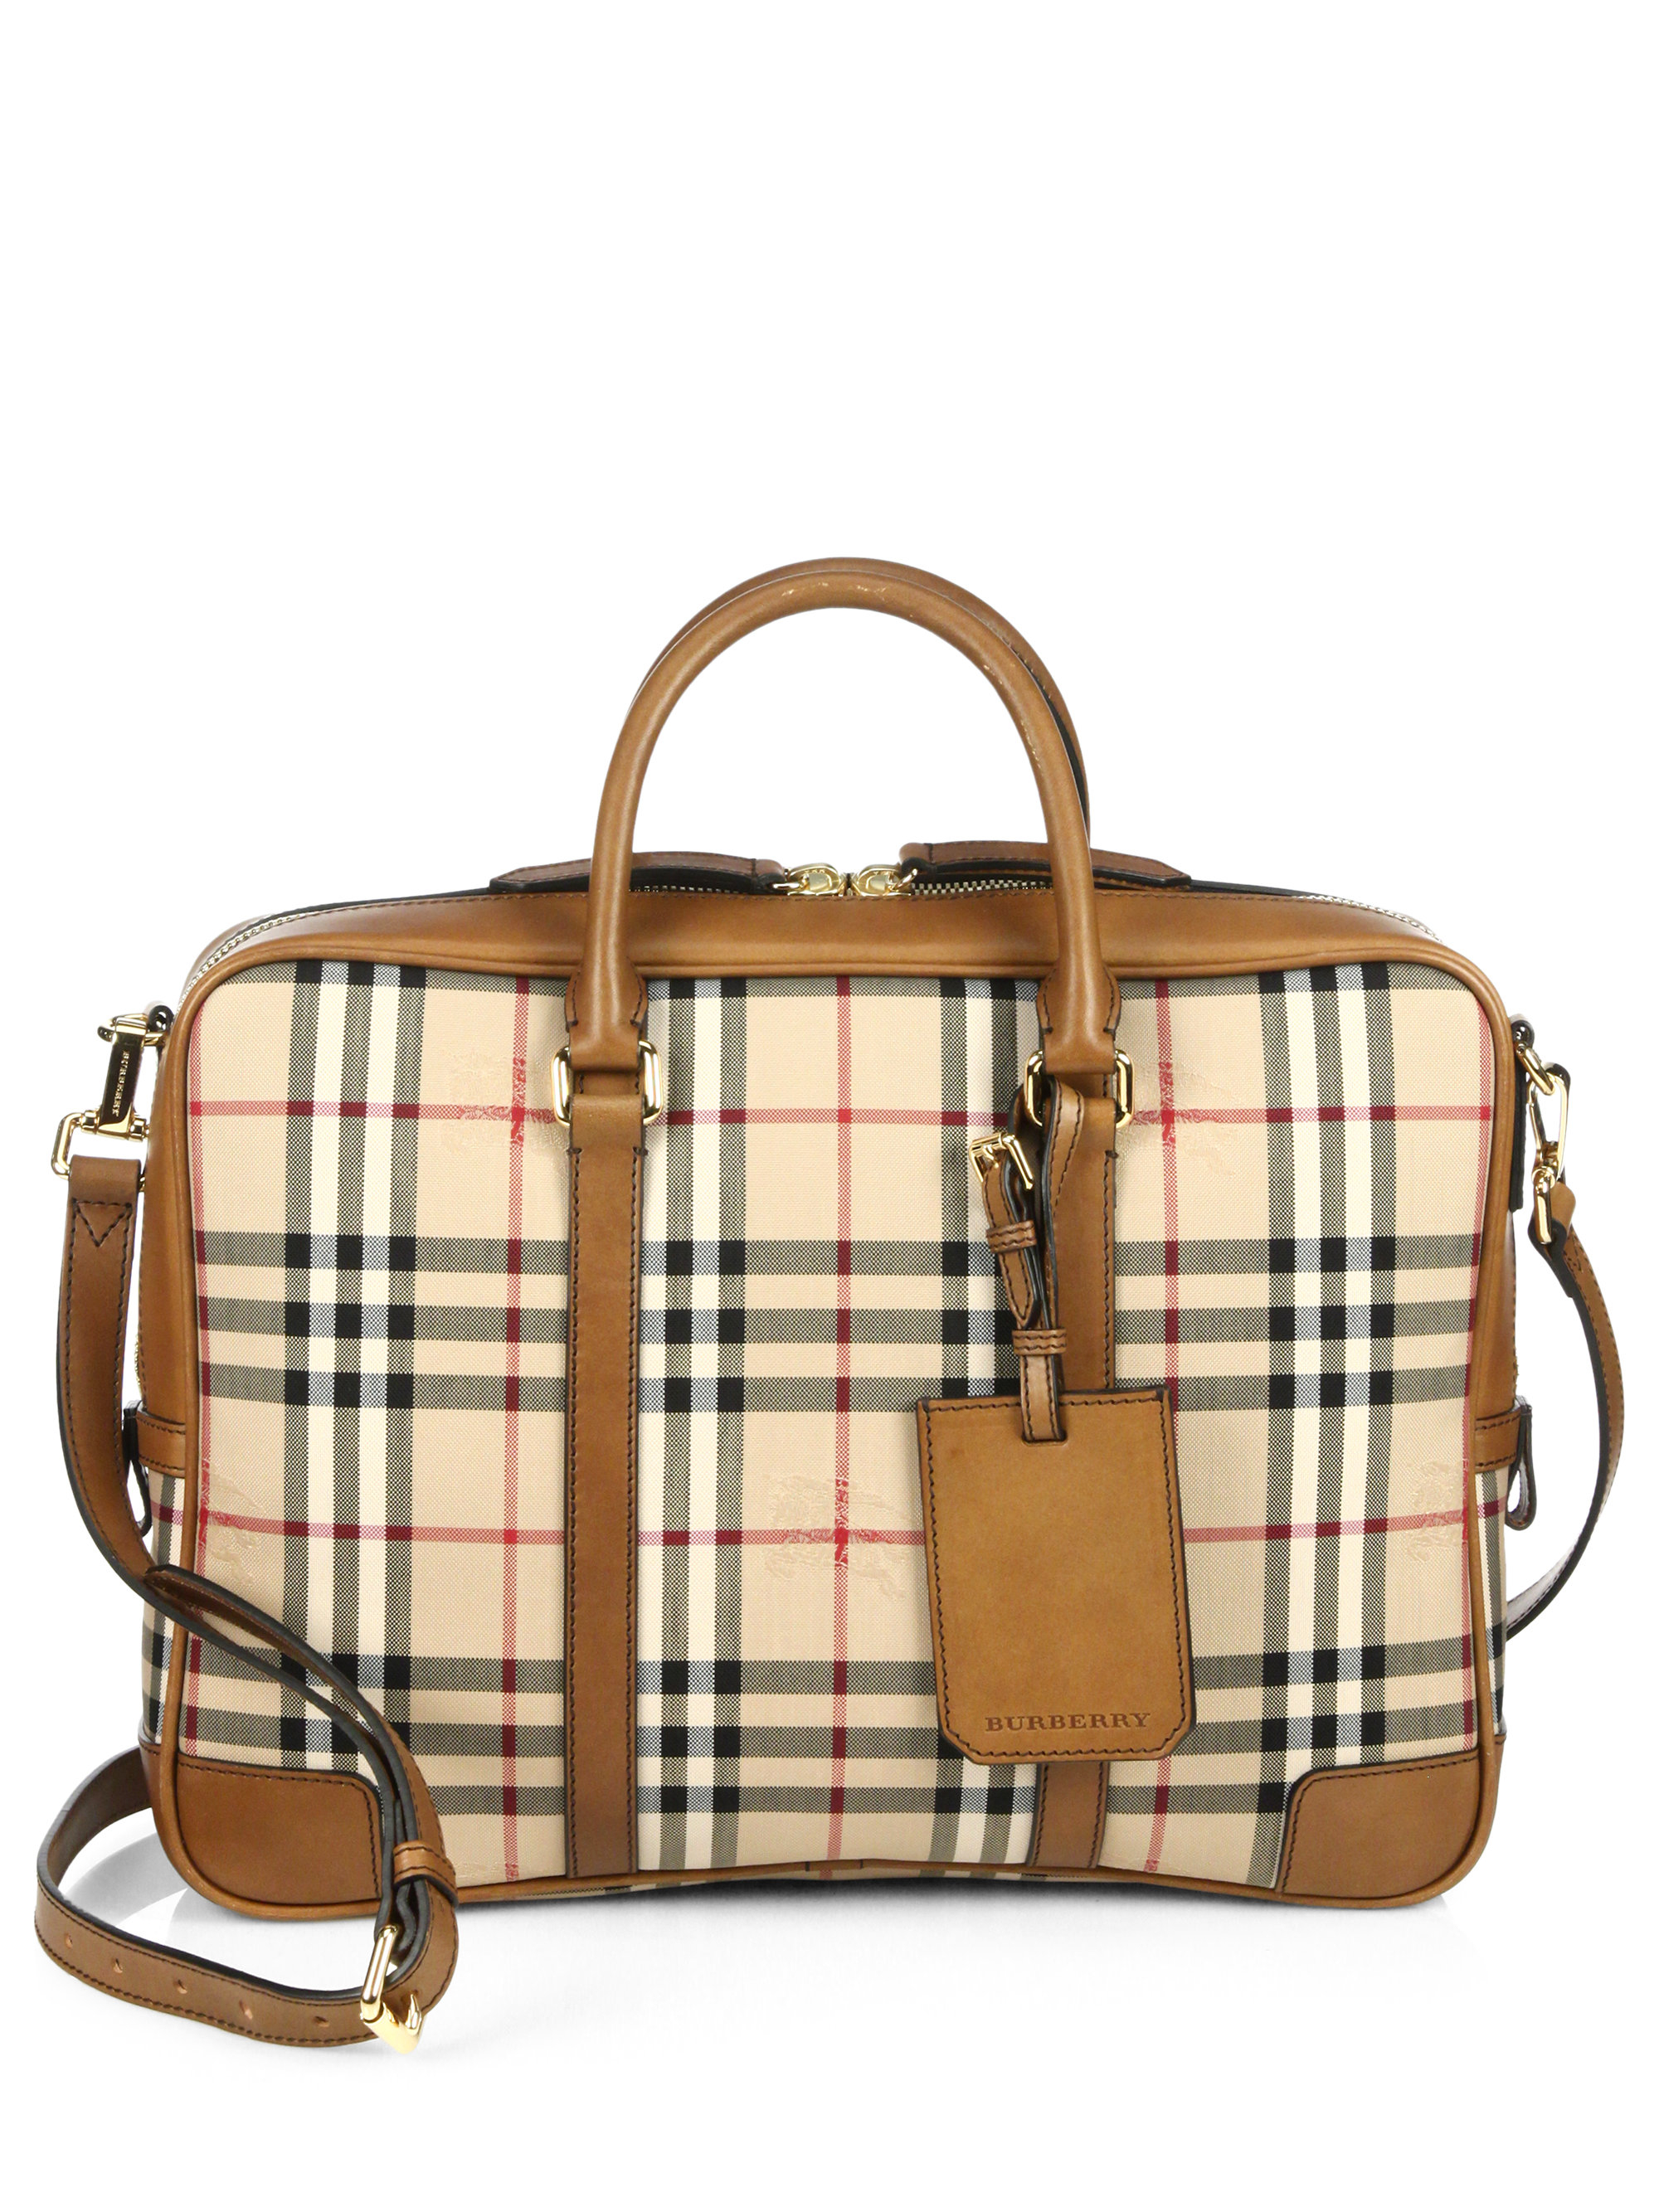 Lyst - Burberry Newburg Checked Briefcase in Natural for Men